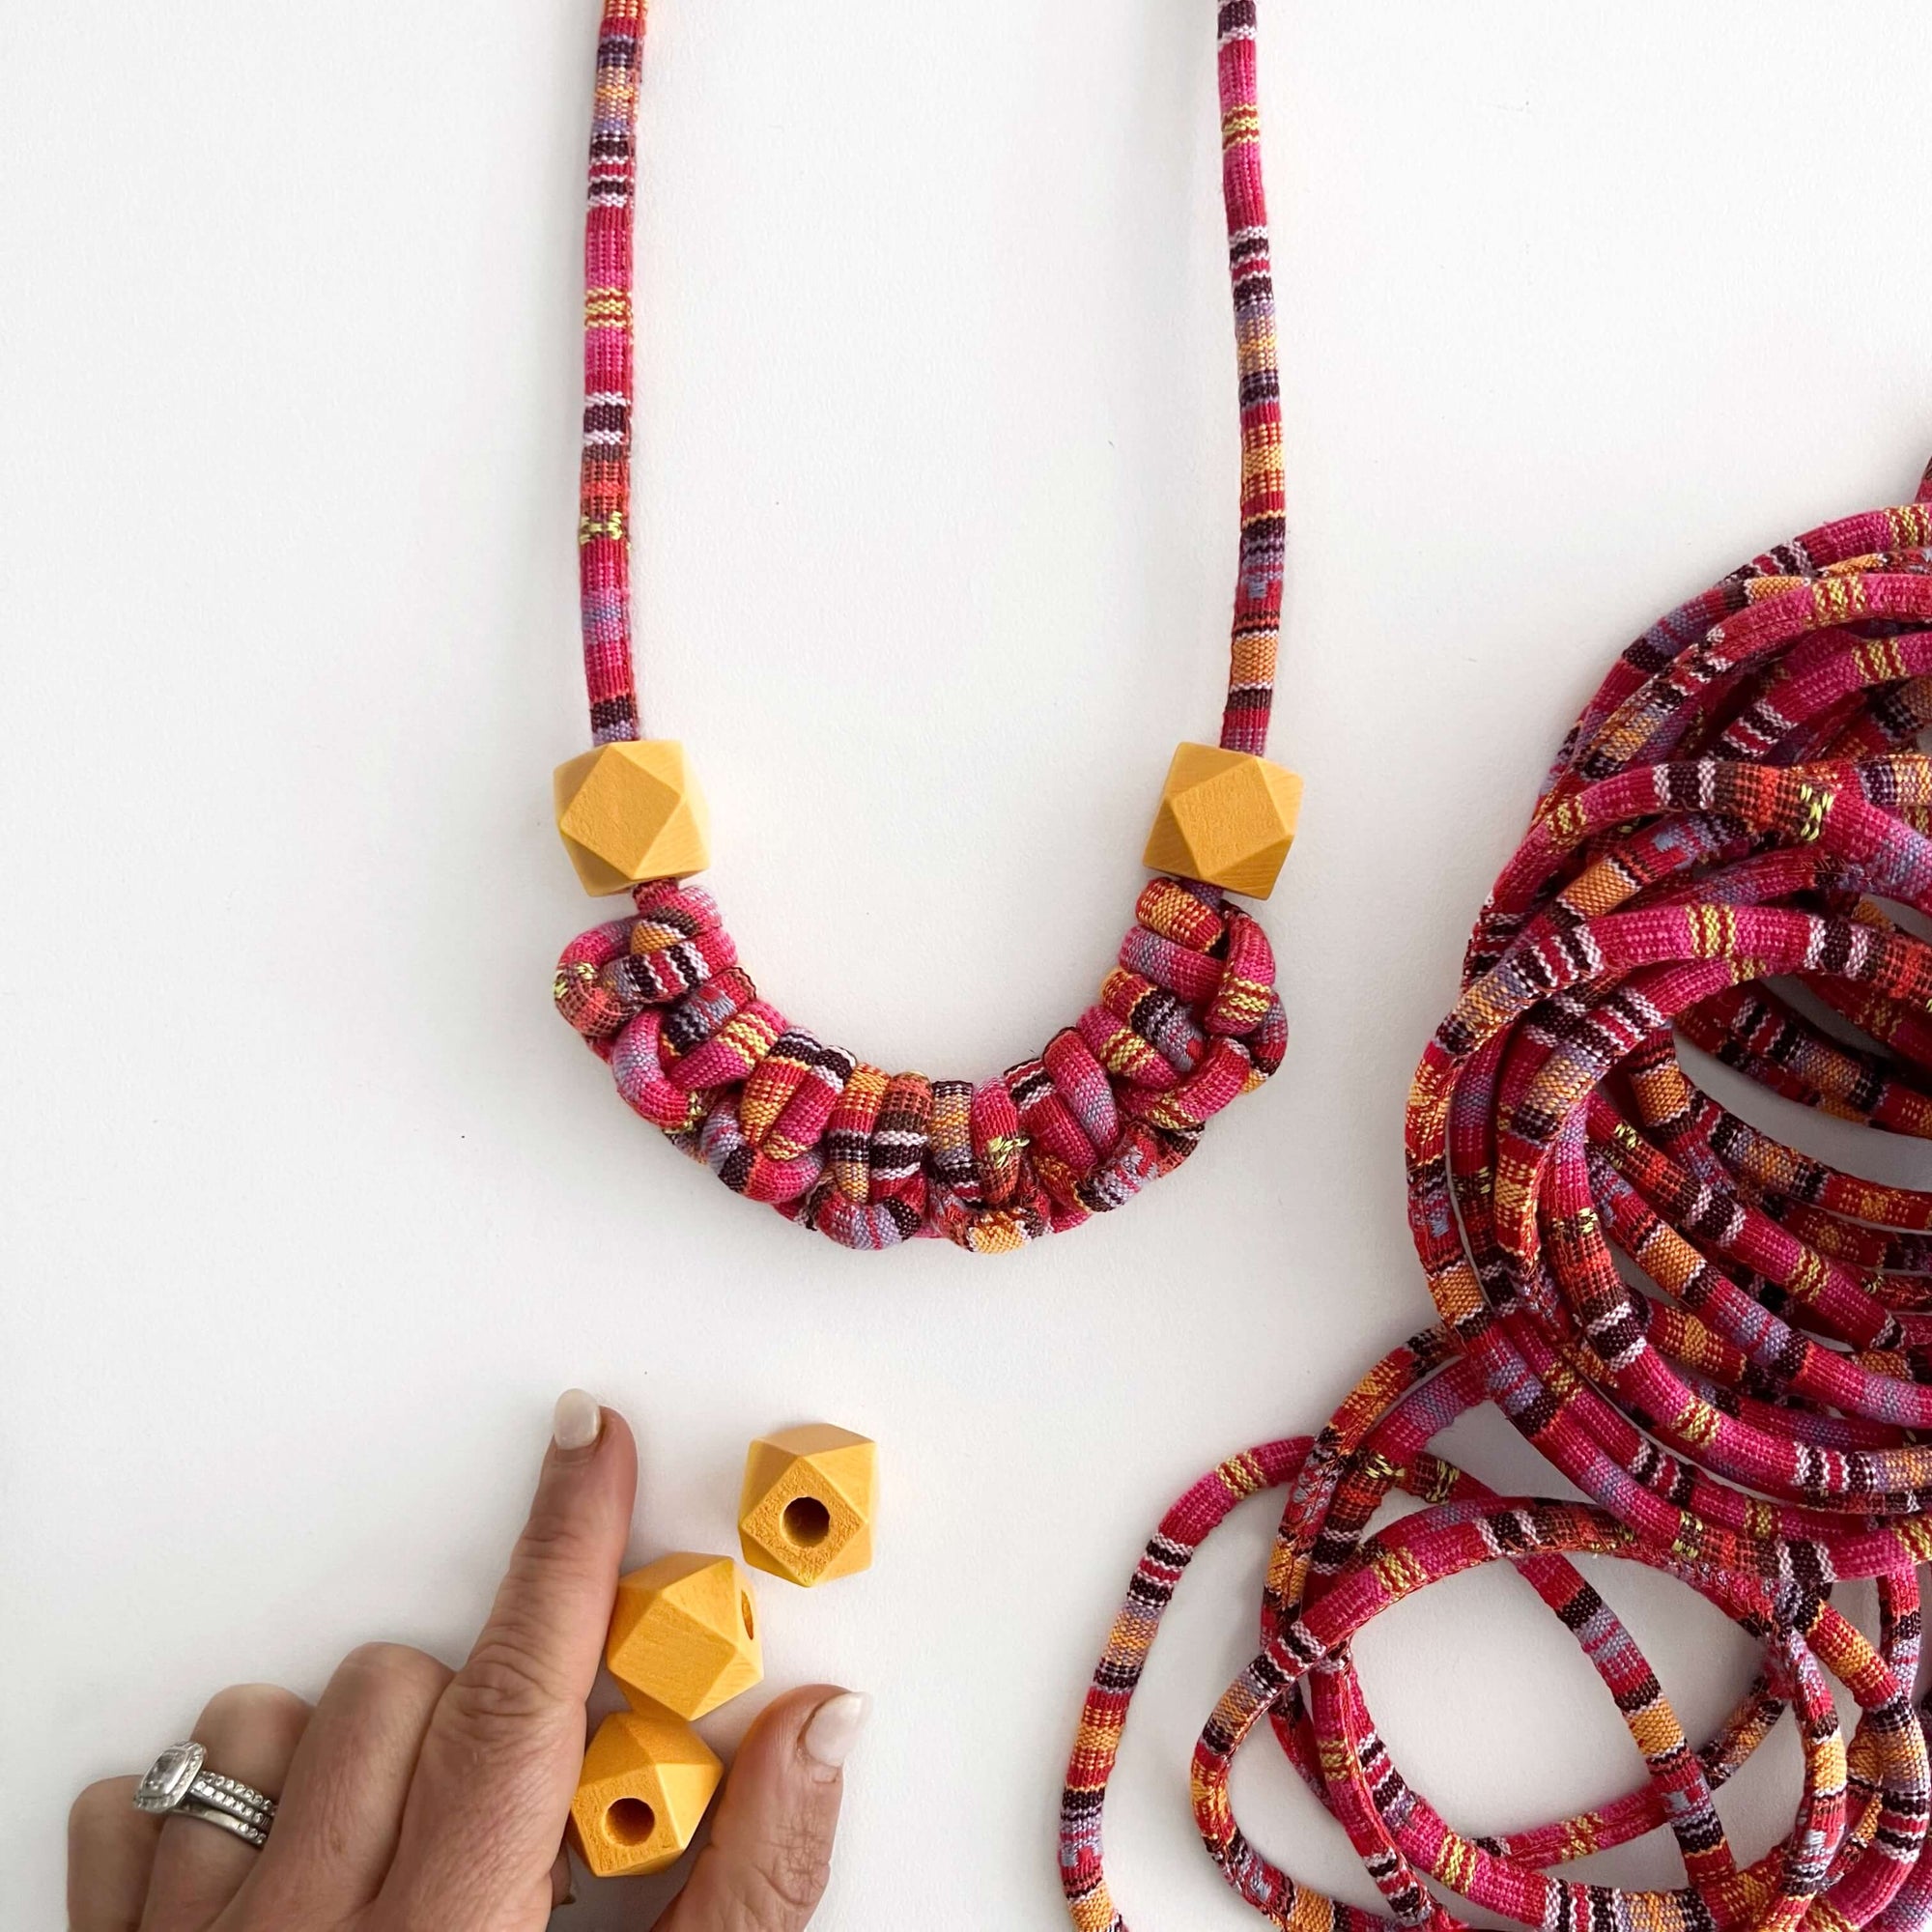 woven cord necklace design with braided rope and beads